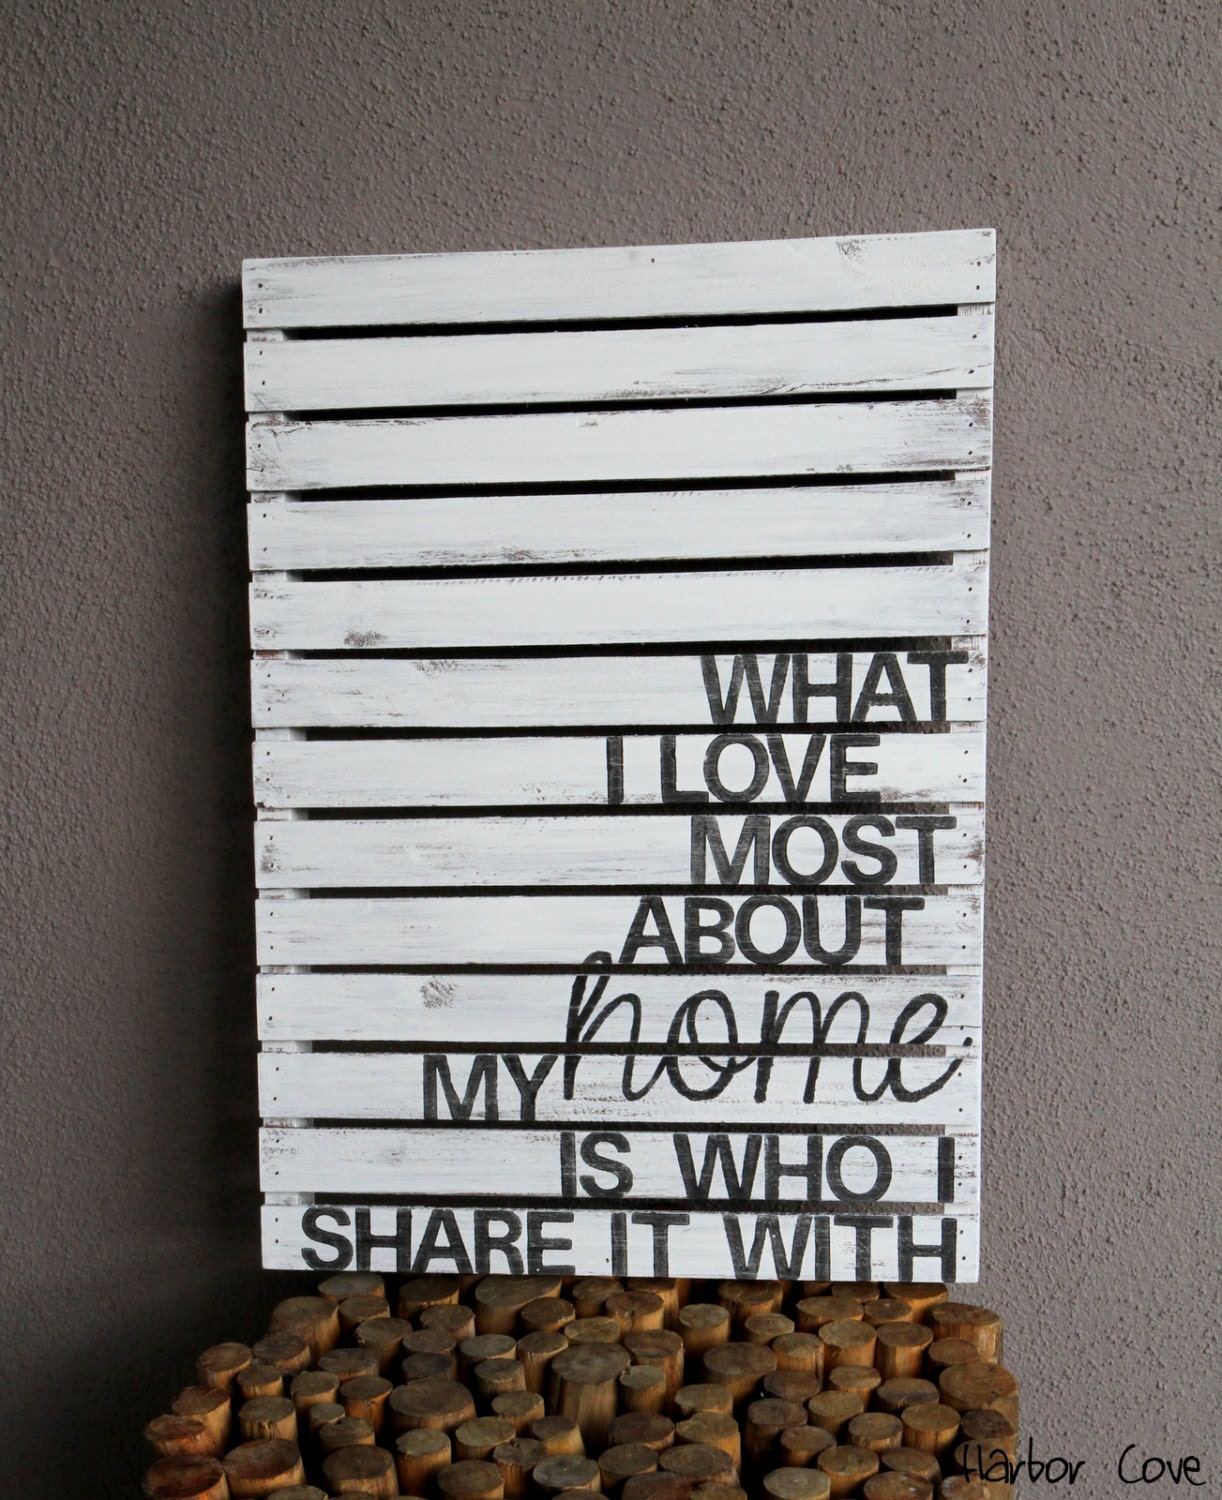 What I Love Most About My Home Is Who I Share It With- Rustic Pallet Wood Sign - HarborCove